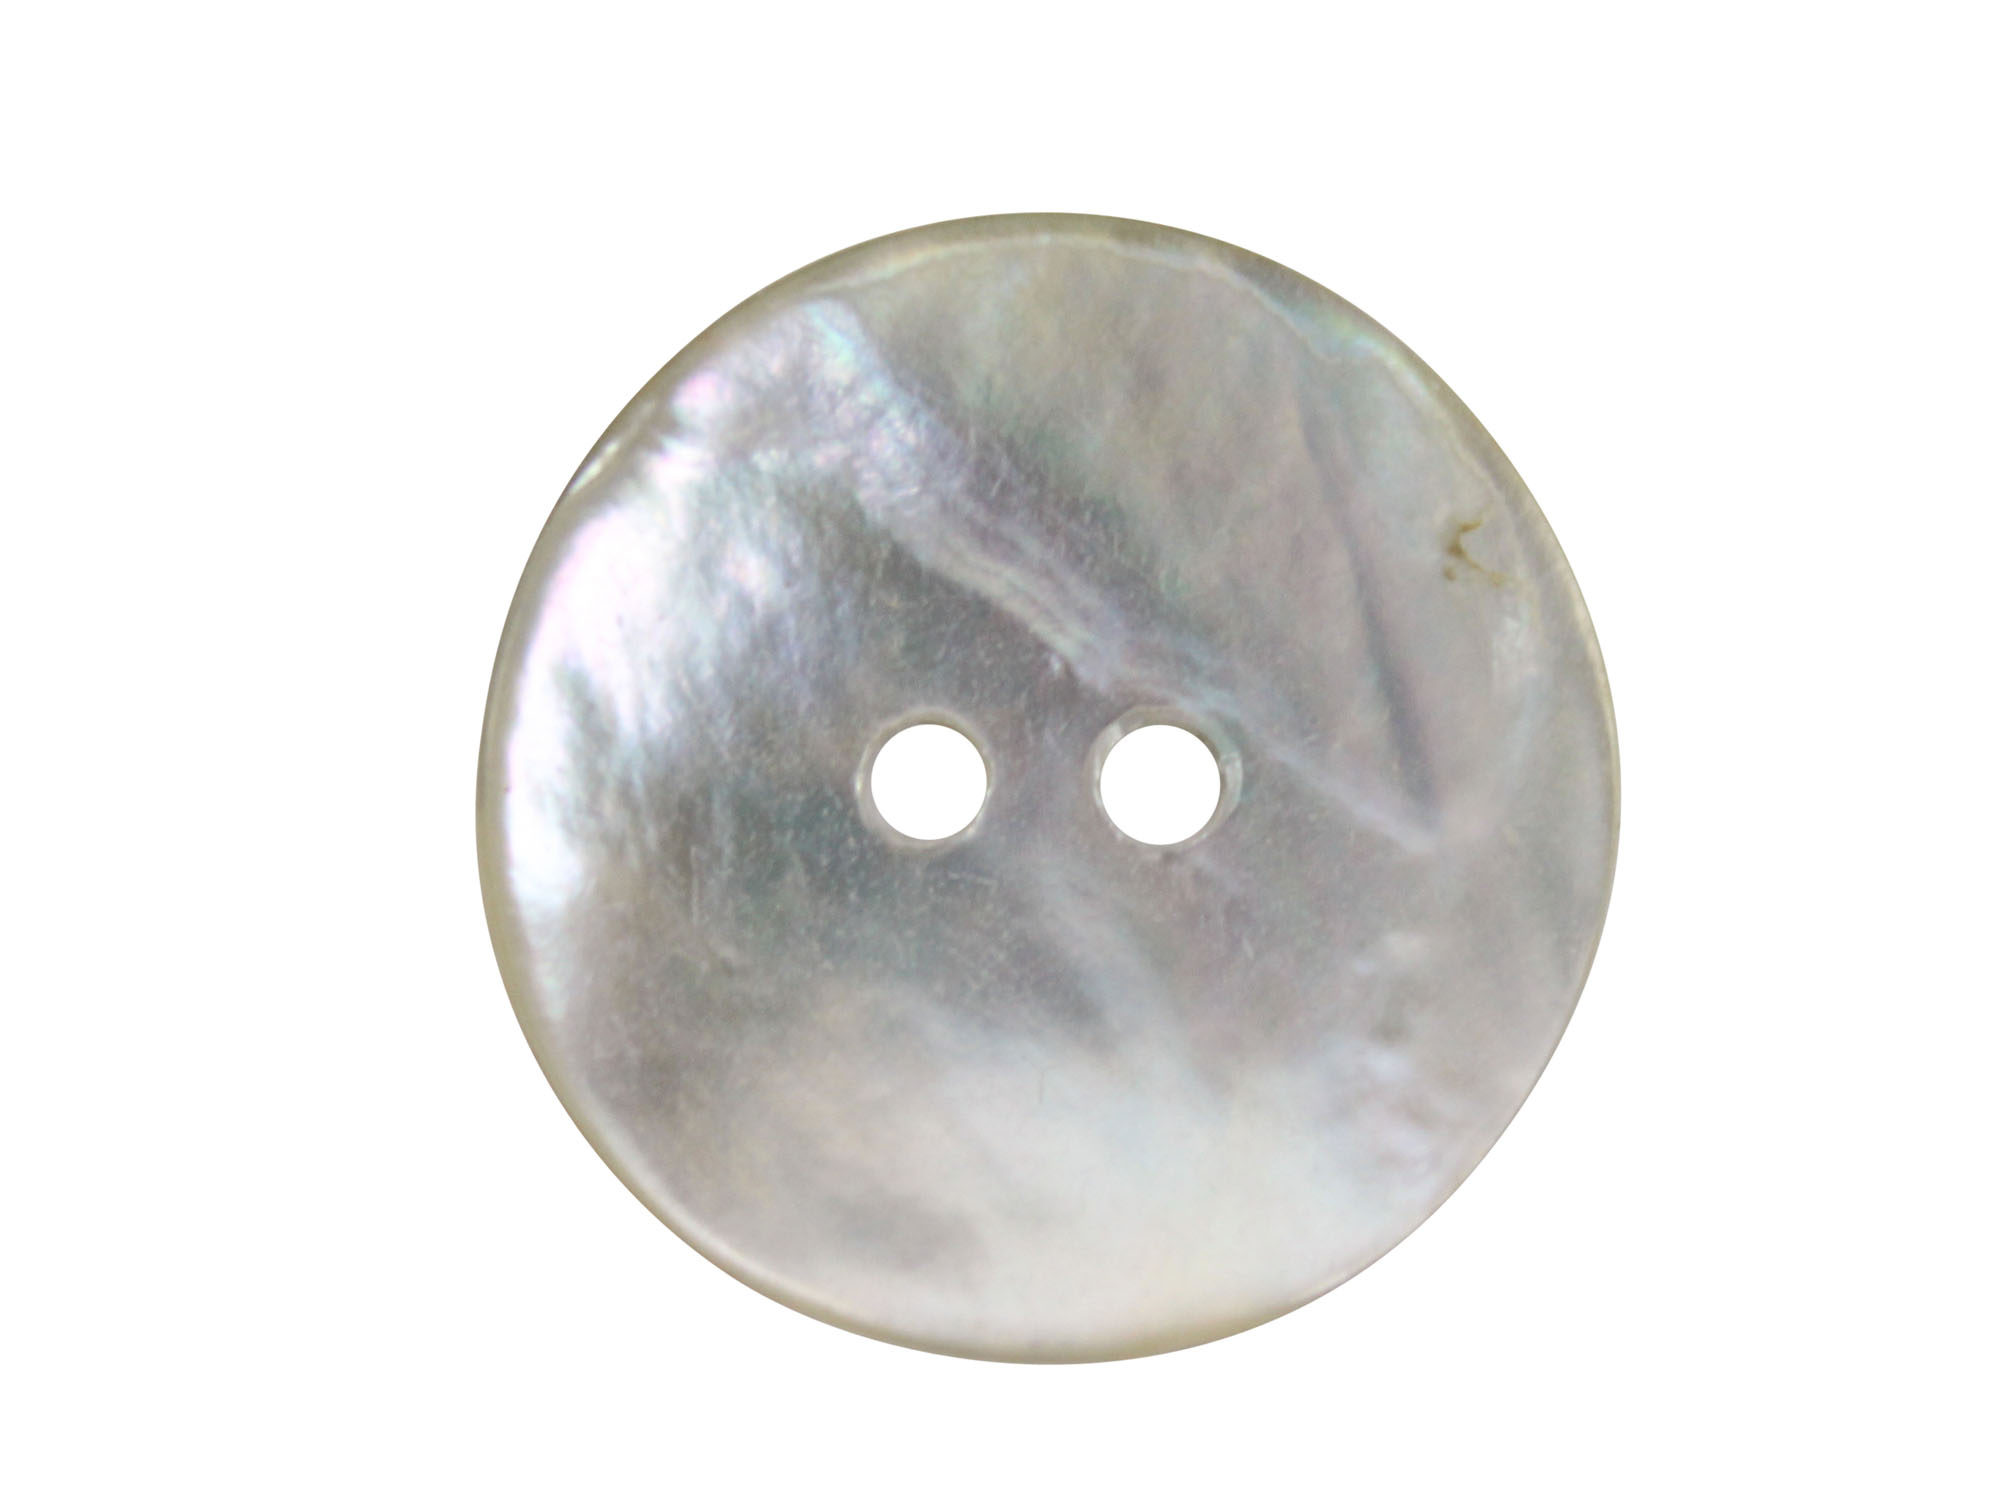 Akoya Mother of Pearl Button: 30L (19mm or 0.748") mother-of-pearl buttons